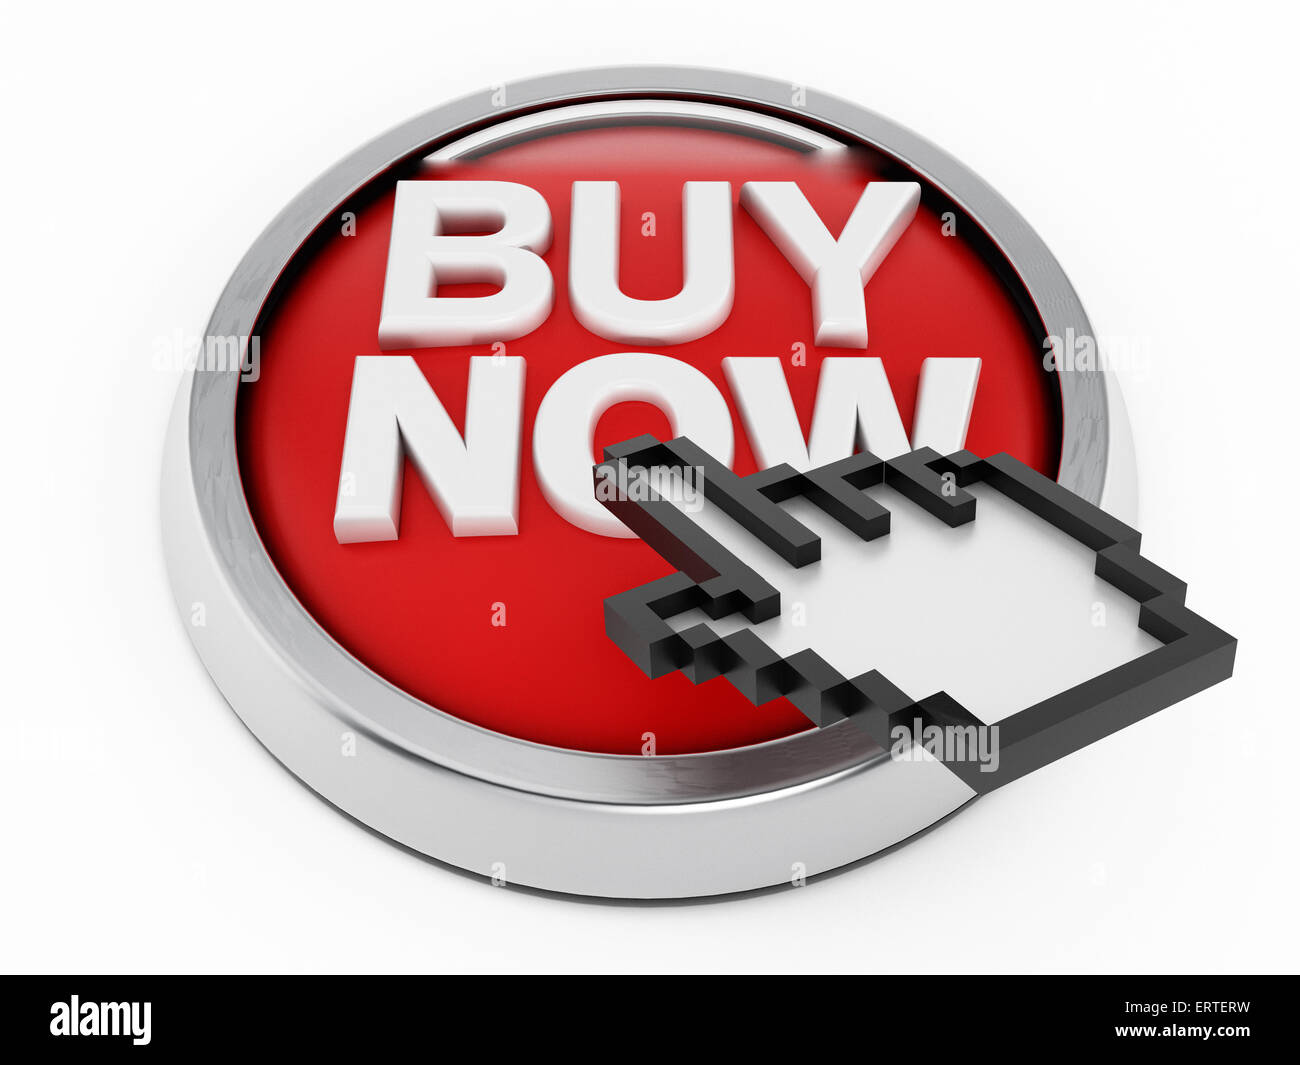 Buy now button isolated on white background Stock Photo